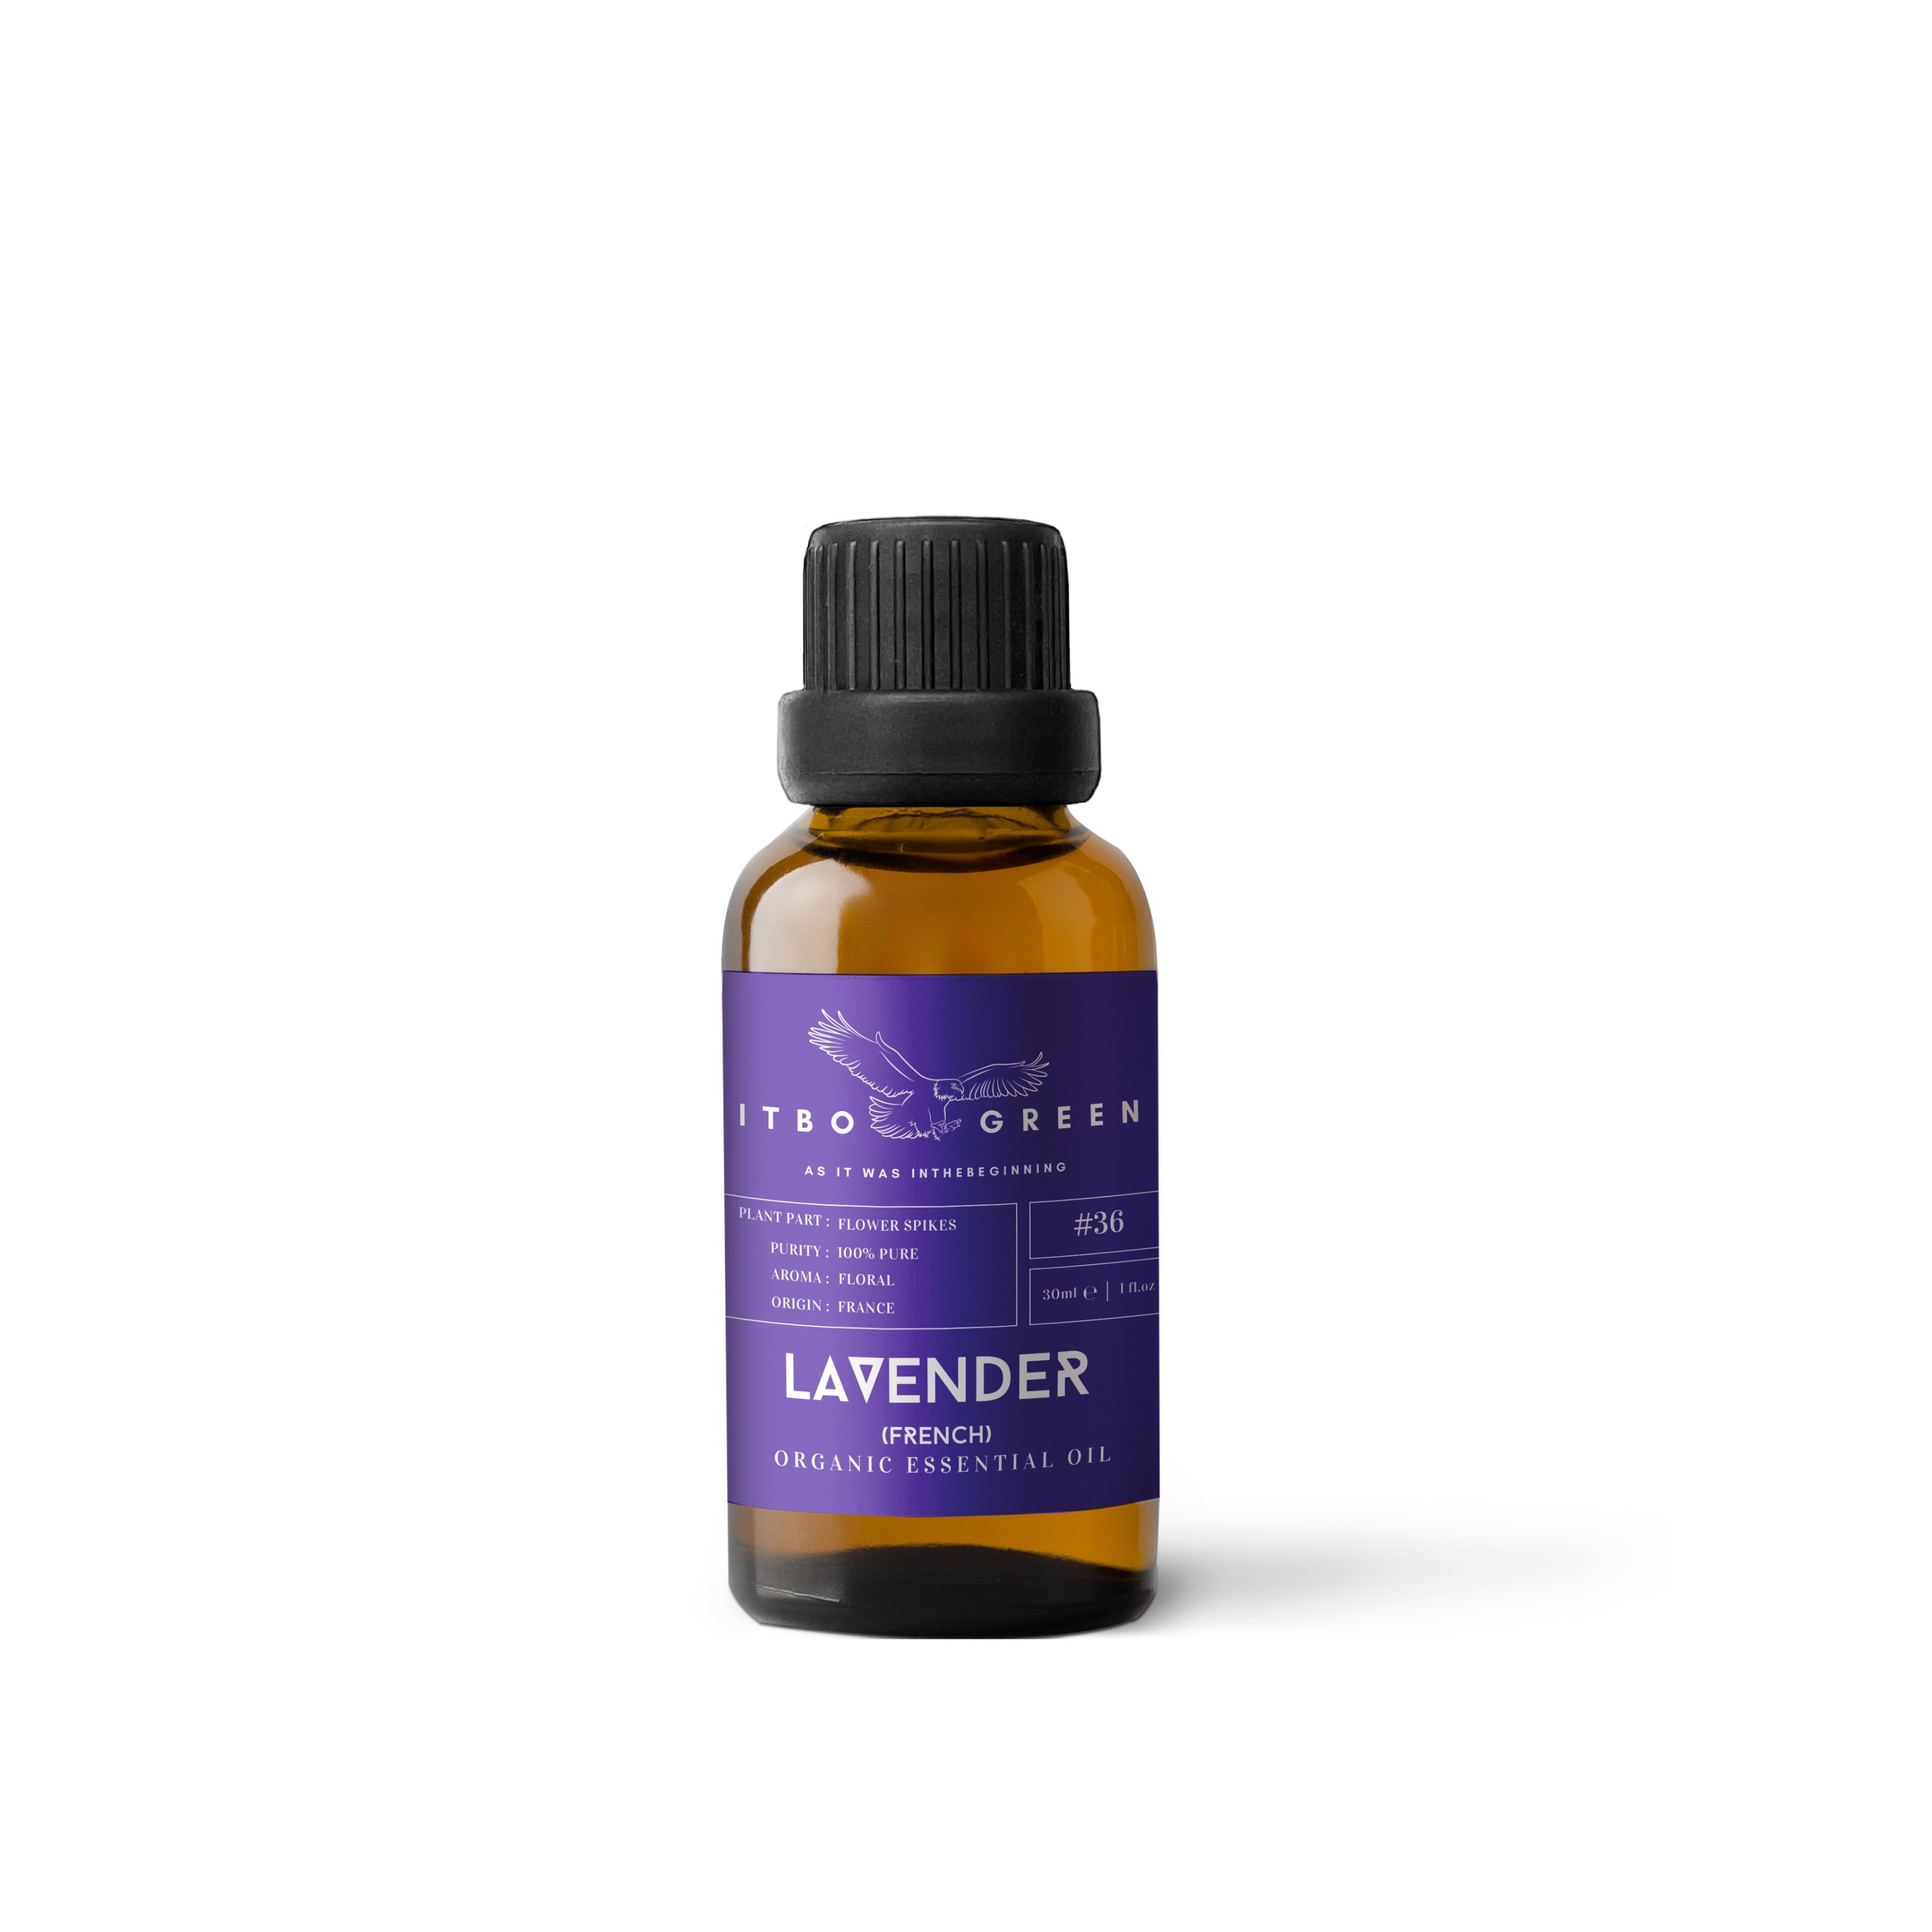 Organic Lavender (French) Essential Oil